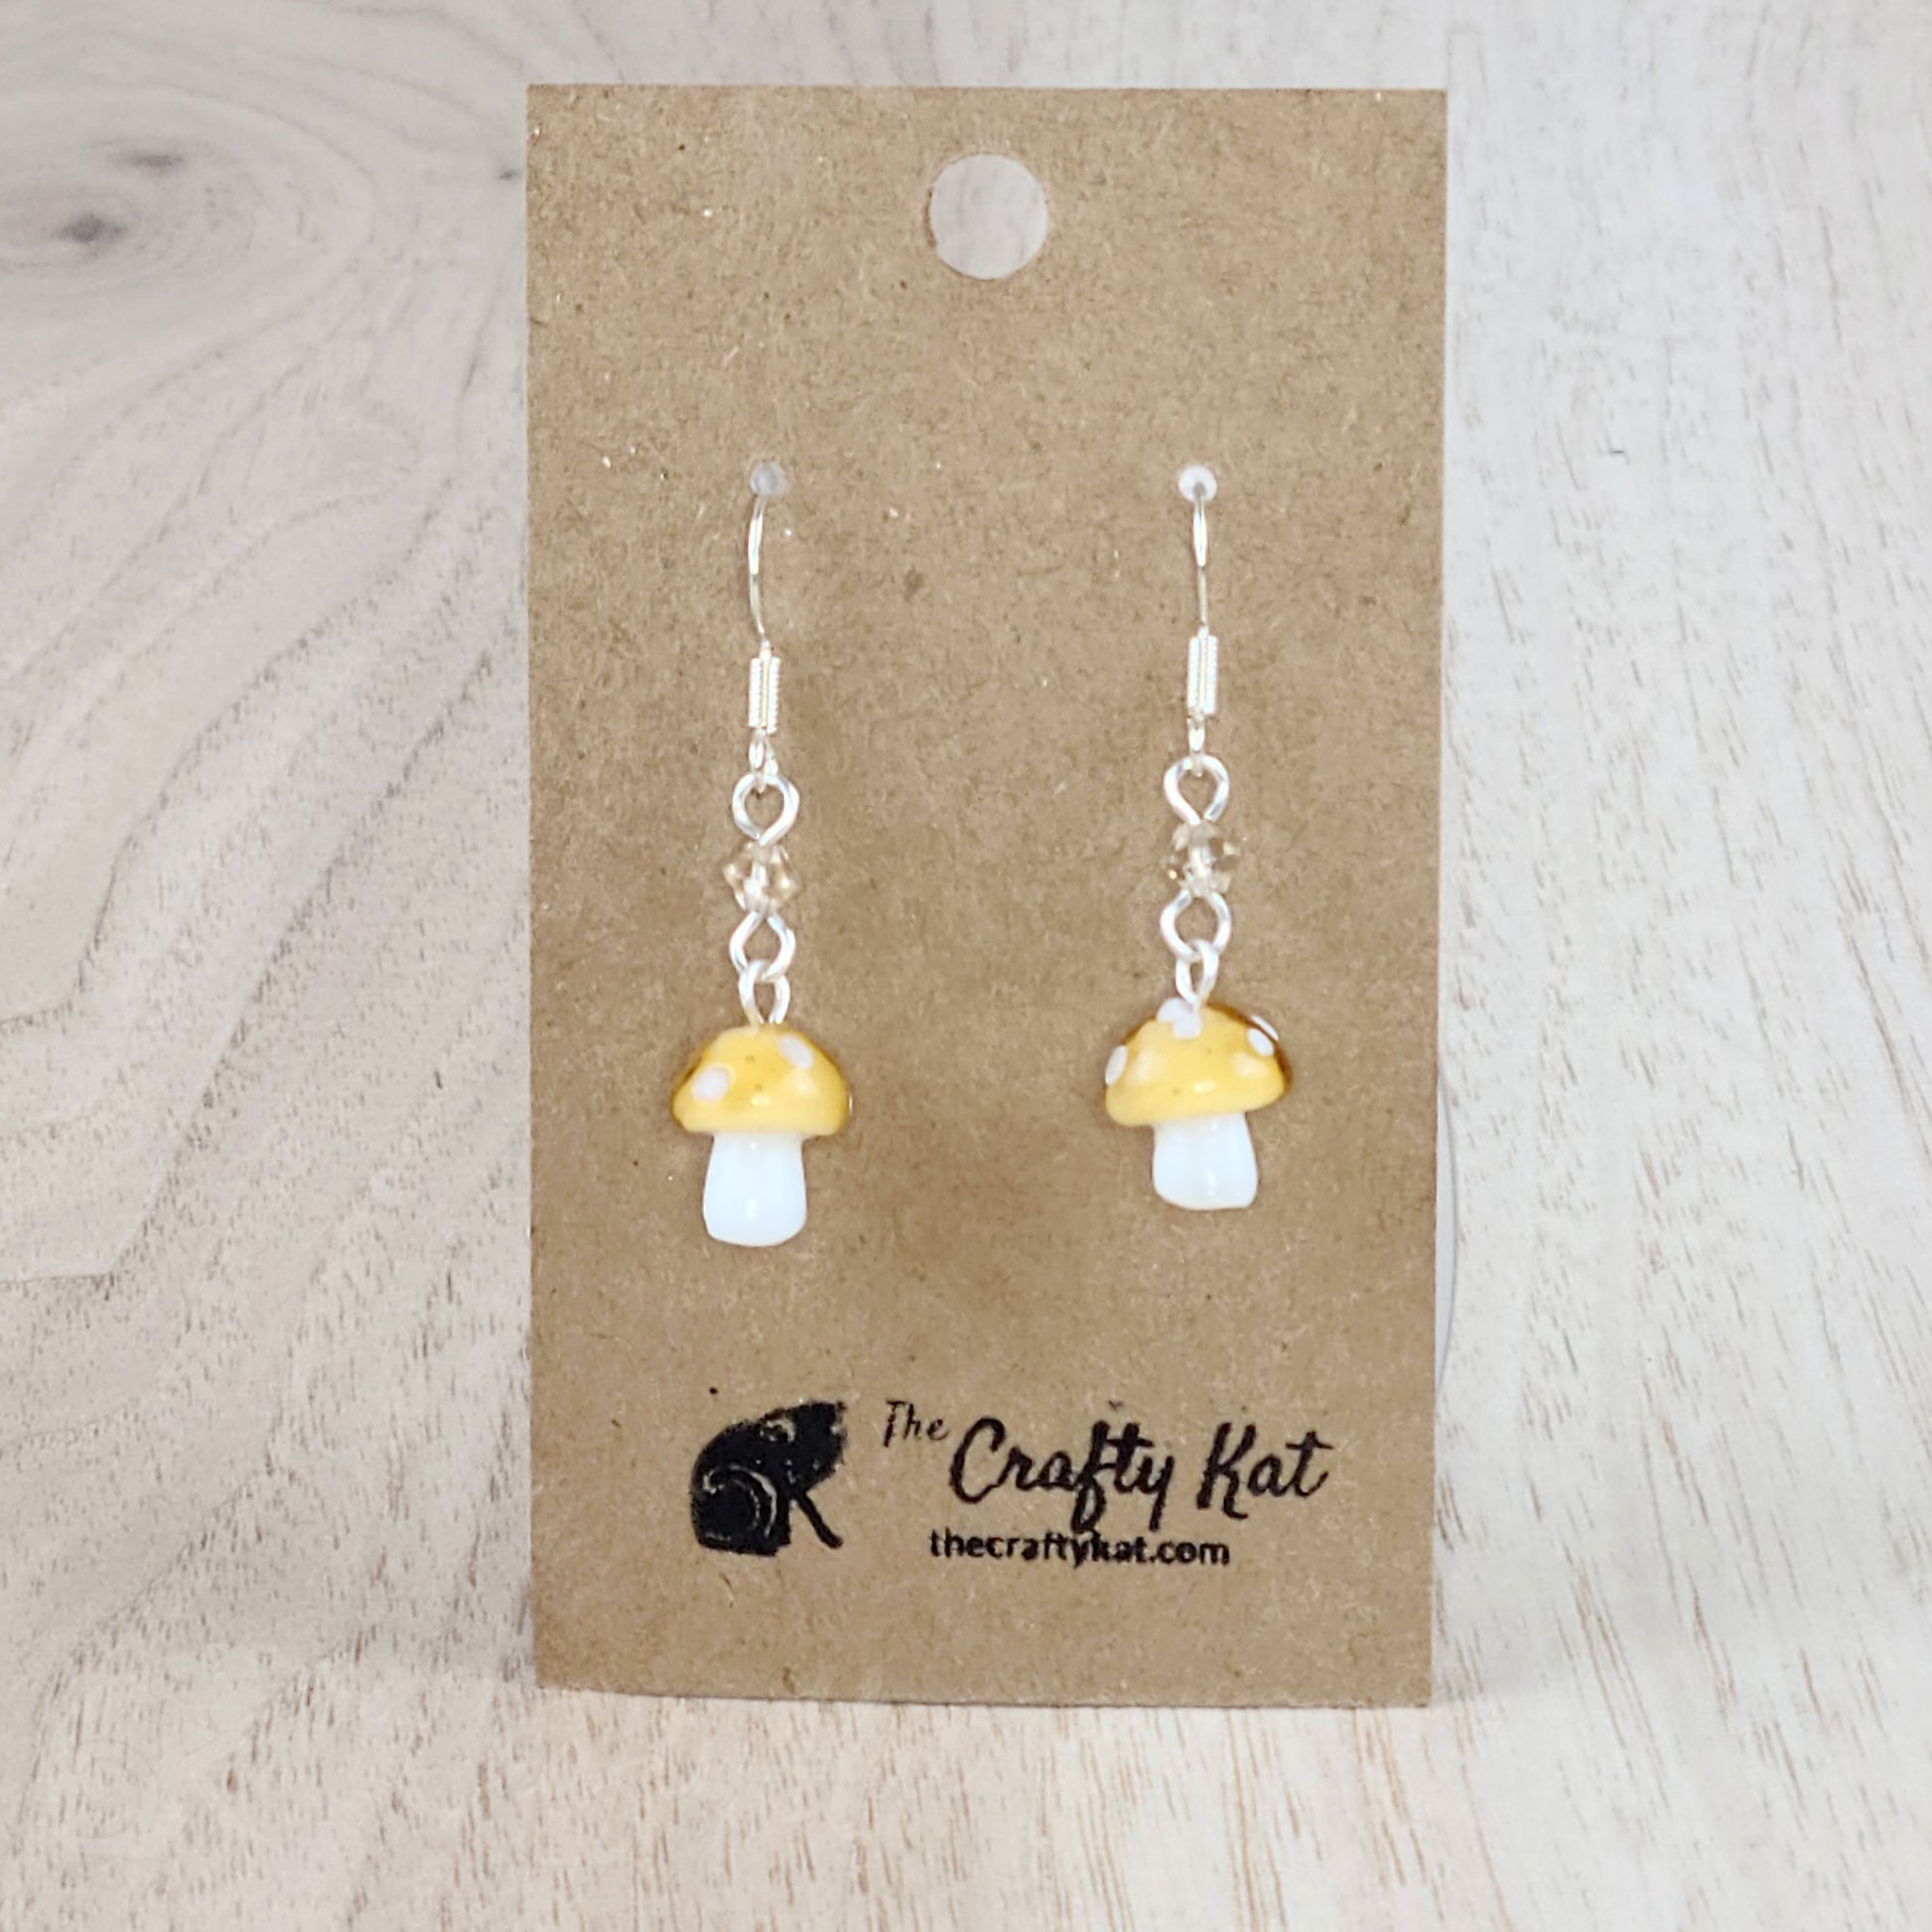 Mushroom-shaped tiered earrings made of lampwork and pressed glass beads with silver-plated base metal fittings. These mushrooms are champagne tan with white spots.